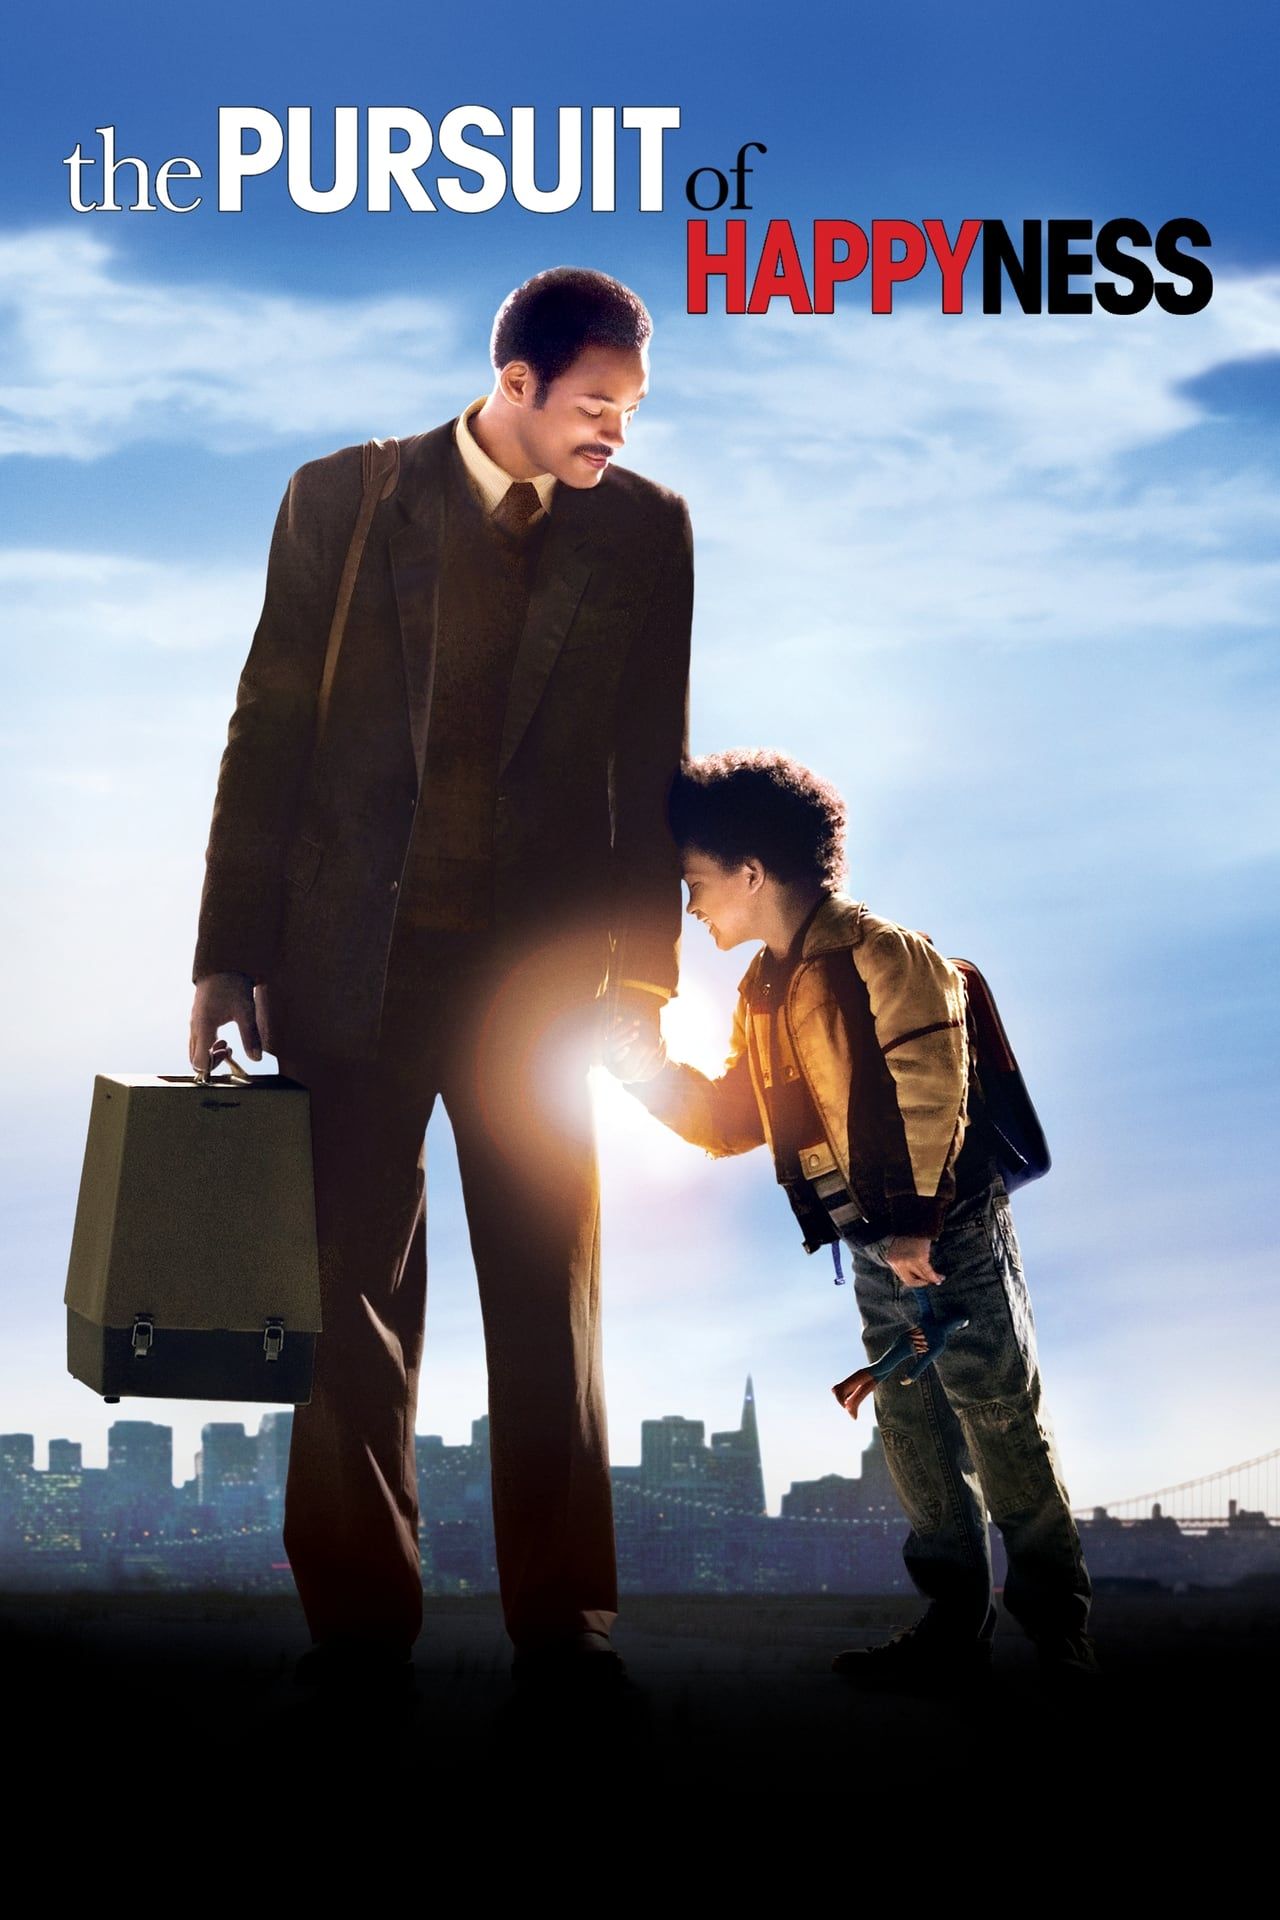 The Pursuit of Happyness Movie Poster Showing Will Smith and Jaden Smith Holding Hands With a Skyline in the Background